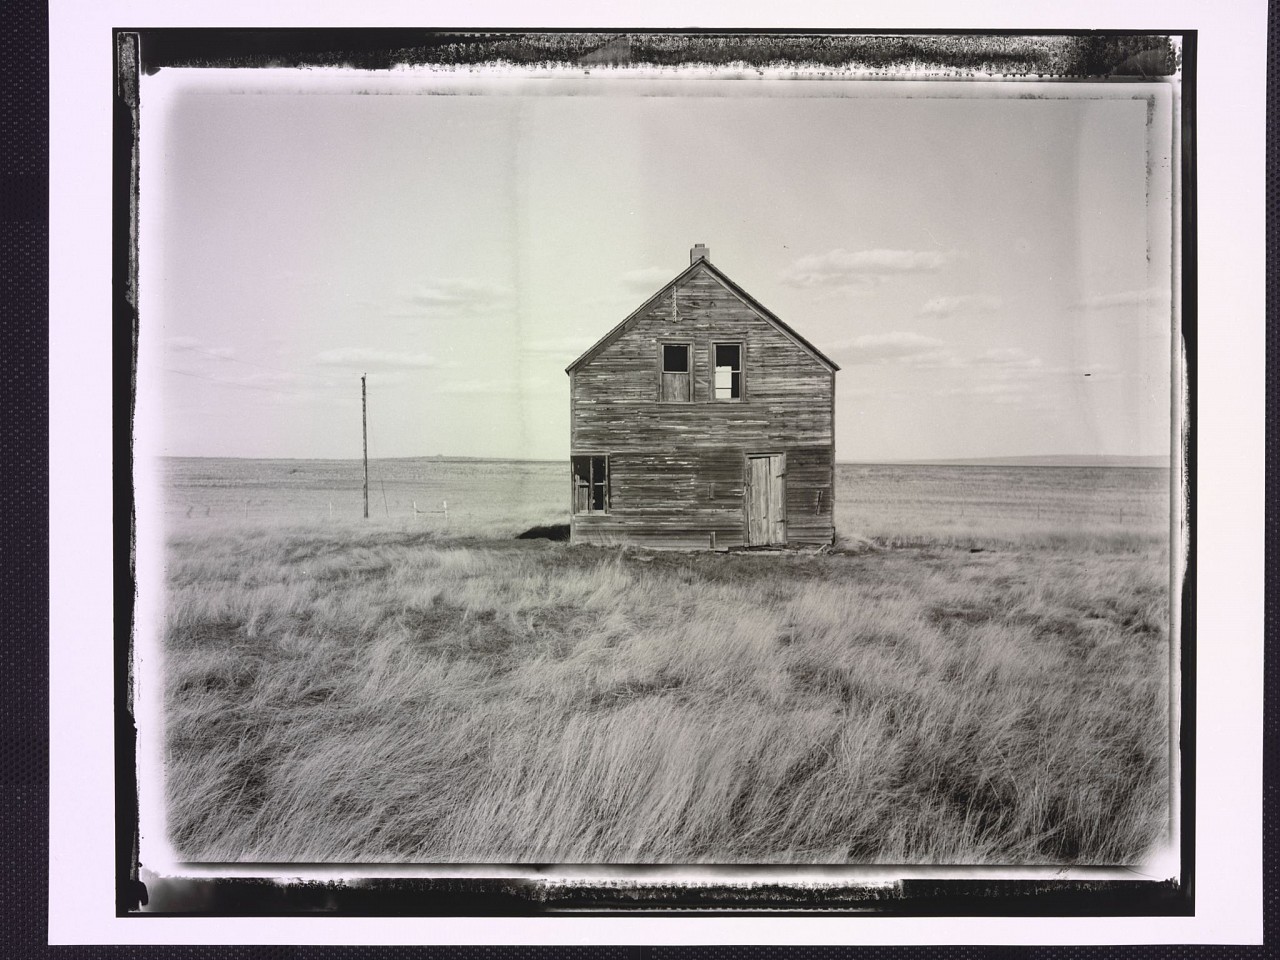 Danny LYON, Abandoned homestead, Corson County, South Dakota, 2000
Later gelatin silver print, 11 x 14 in.
2019.03.026
ADDITIONAL INFORMATION: Illustrated: Danny Lyon, The Seventh Dog (New York, The Phaidon Press, 2014), p. 32
Credit Line: Lafayette College Art Collection, Easton, PA; Gift of Bennett ('79) and Meg Goodman